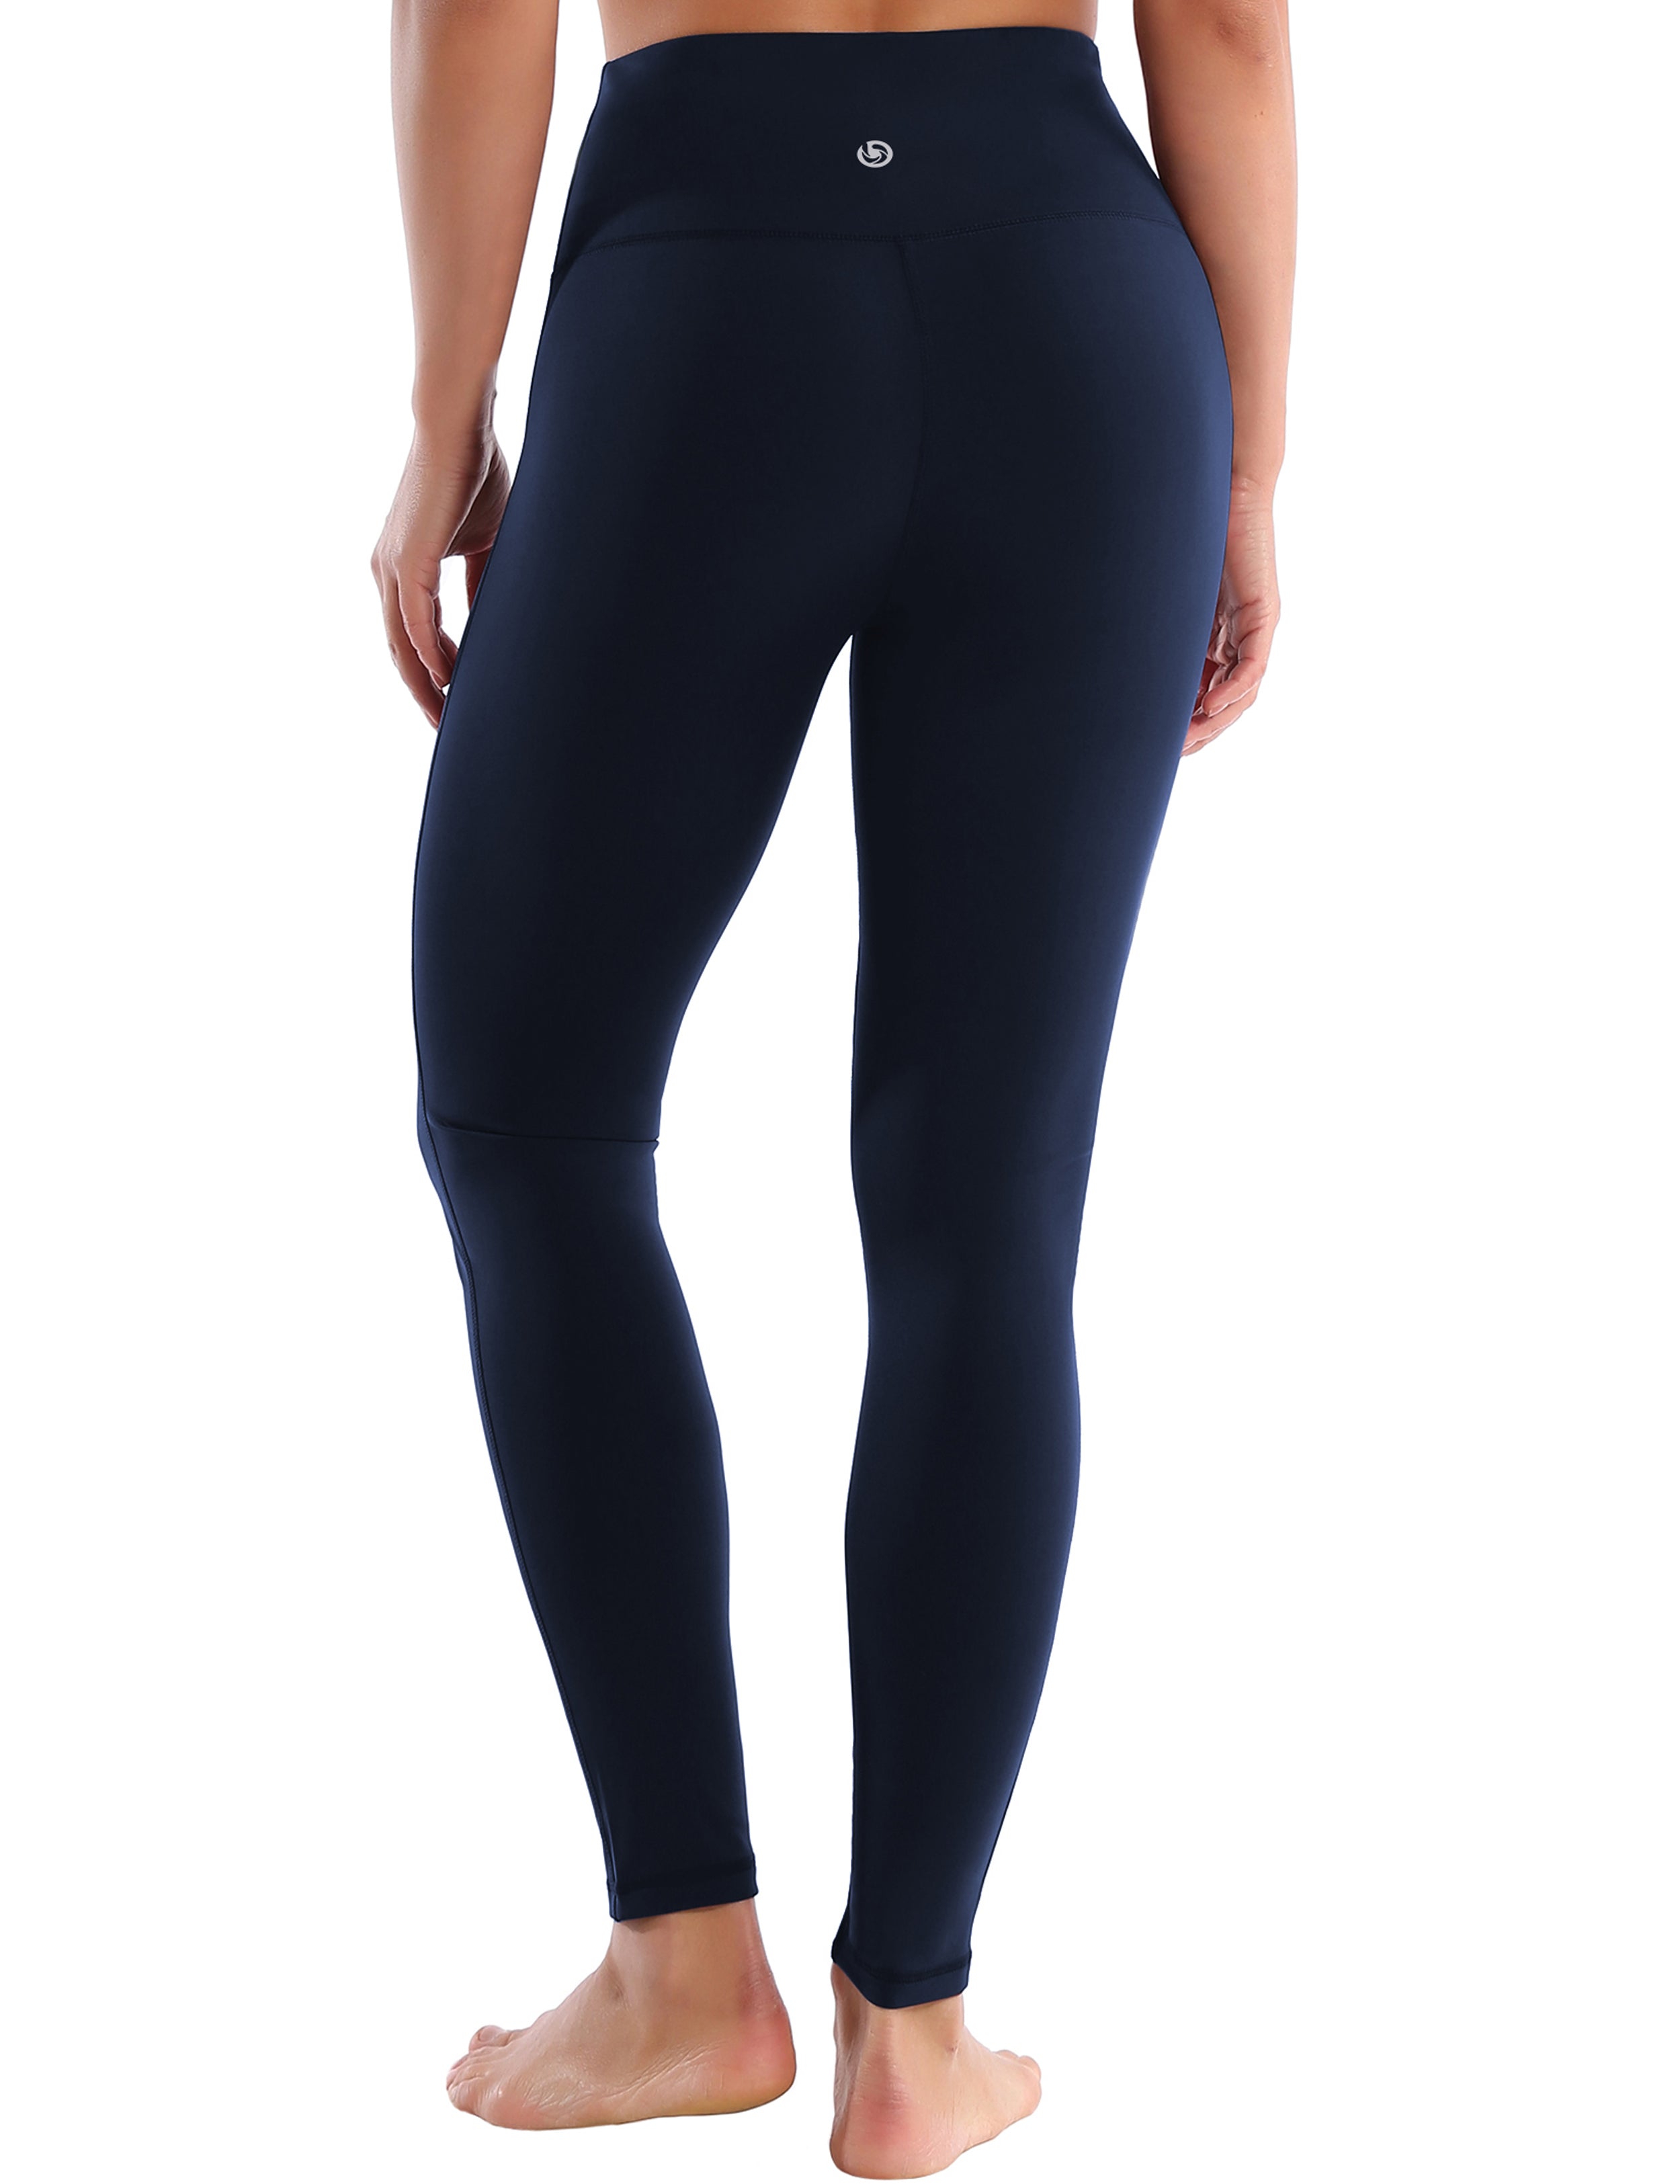 High Waist Side Line Biking Pants darknavy Side Line is Make Your Legs Look Longer and Thinner 75%Nylon/25%Spandex Fabric doesn't attract lint easily 4-way stretch No see-through Moisture-wicking Tummy control Inner pocket Two lengths